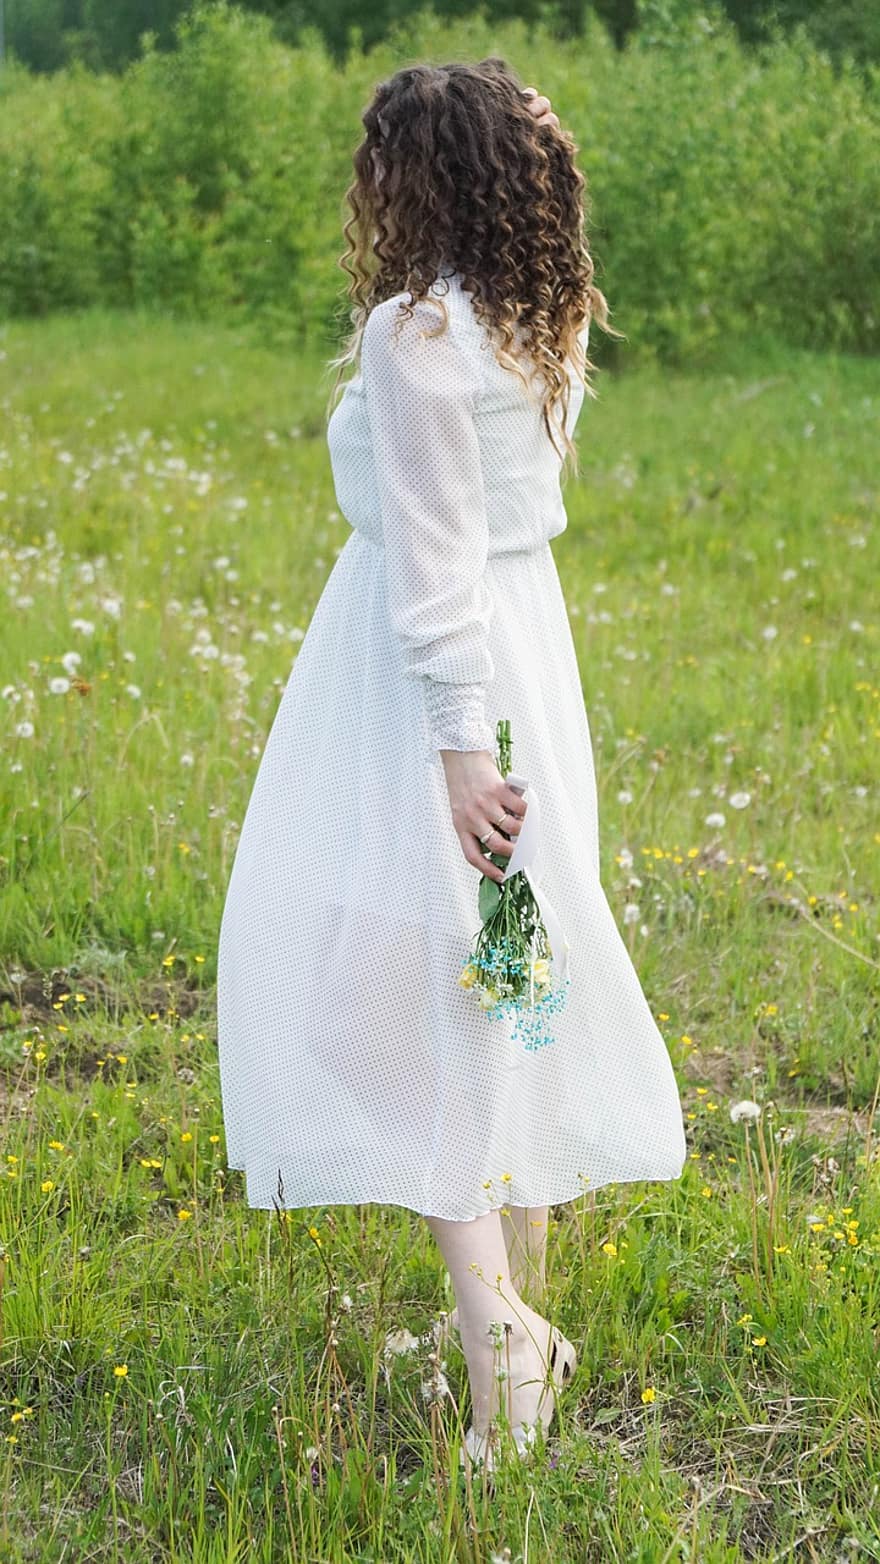 Girl, White Dress, Bouquet, Meadow, Grass, Field, Curly Hair, Brunette, Hairstyle, Dress, Fashion